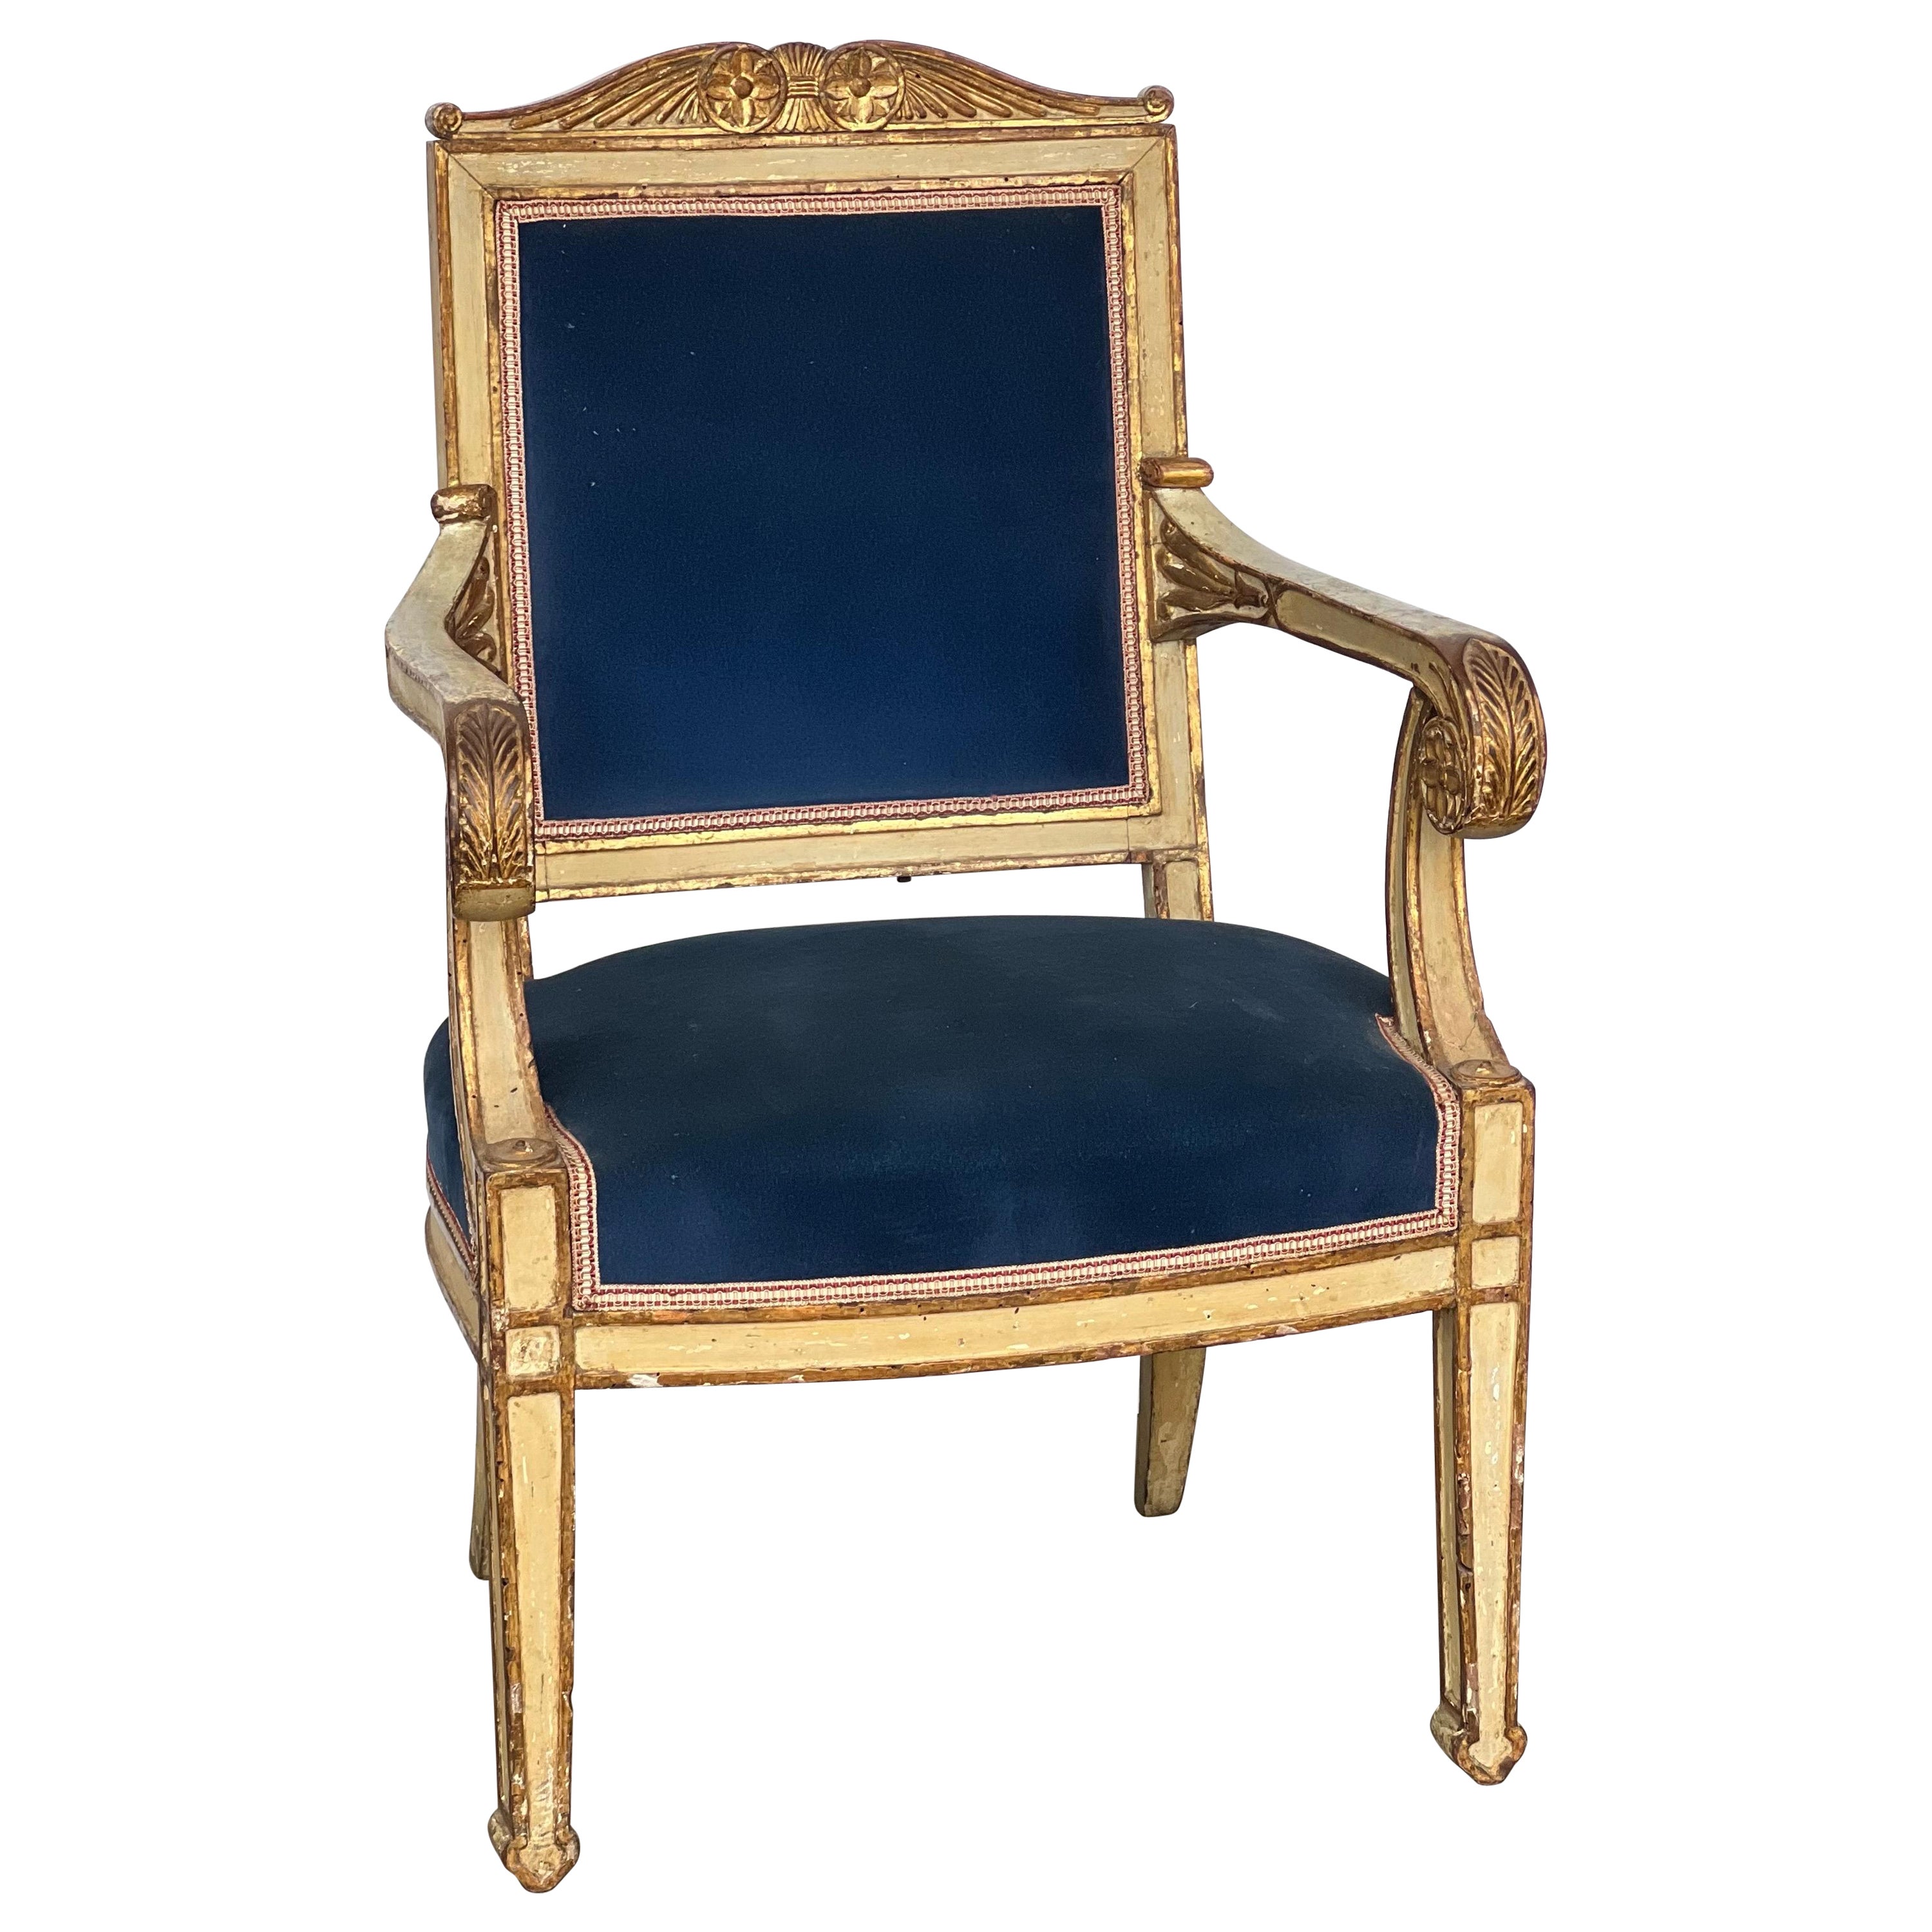 19th Century Gold Gilt and Painted Empire Armchair